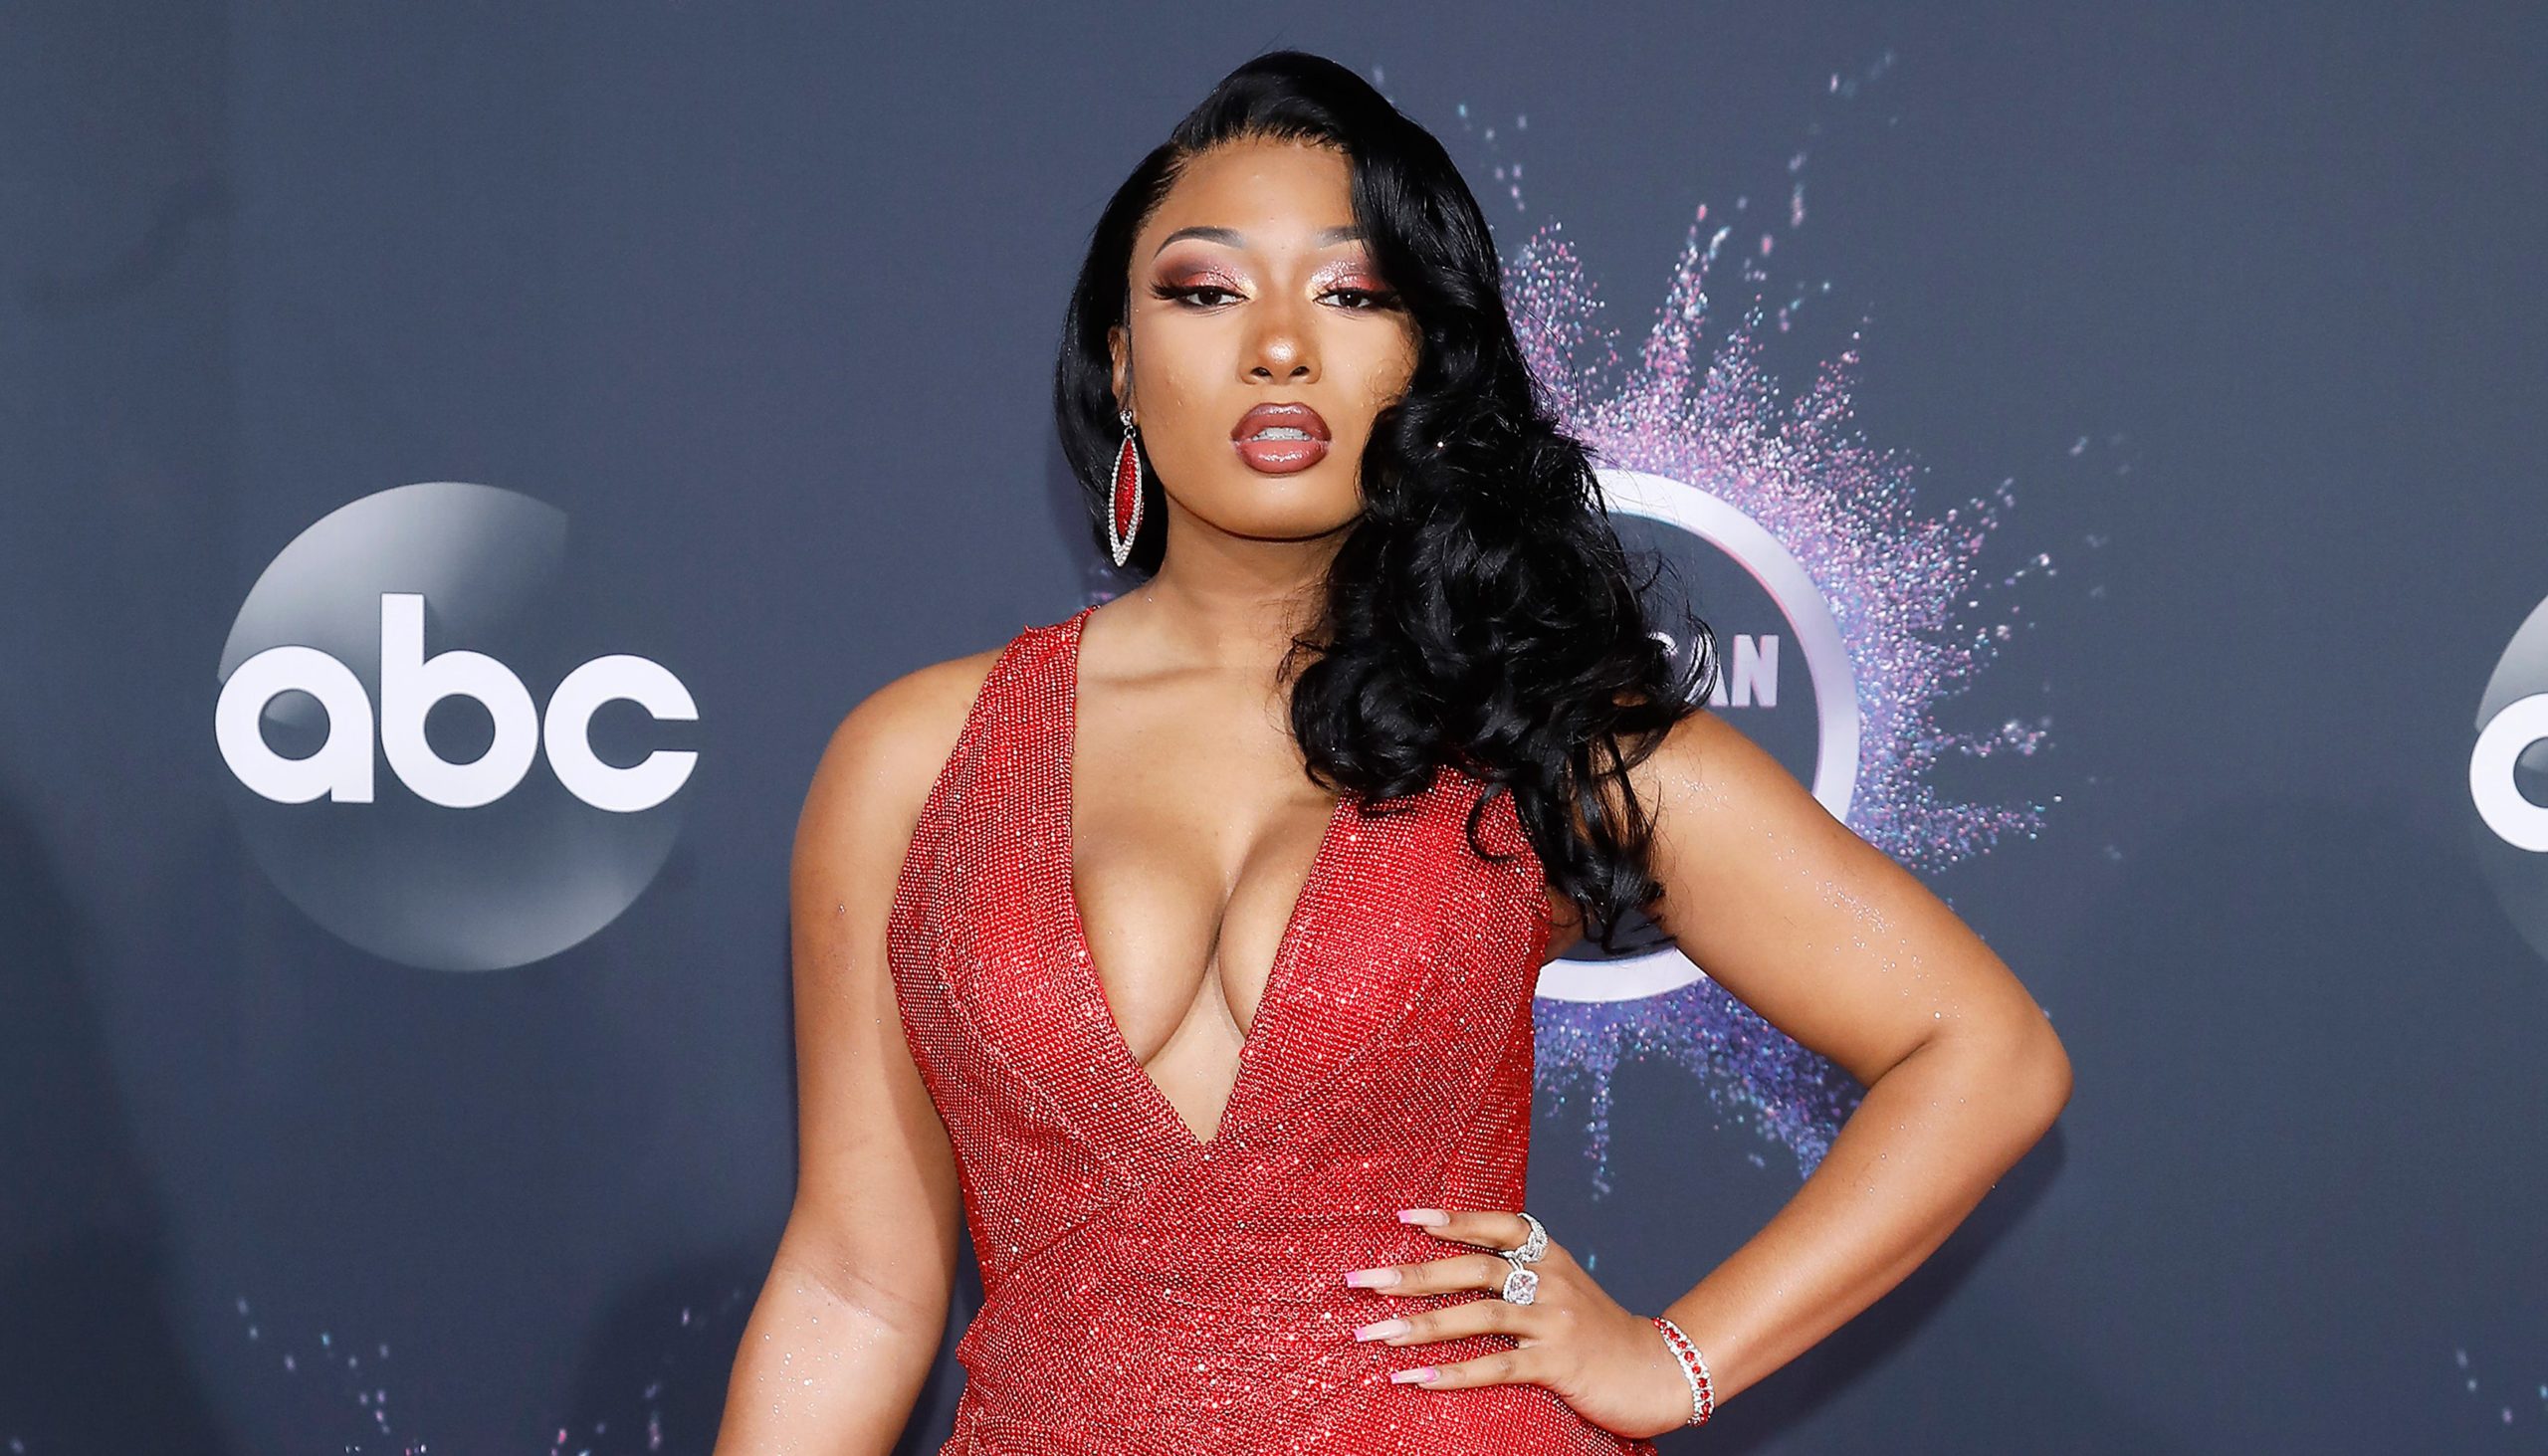 Megan Thee Stallion Shares Photos of Her Natural Curls